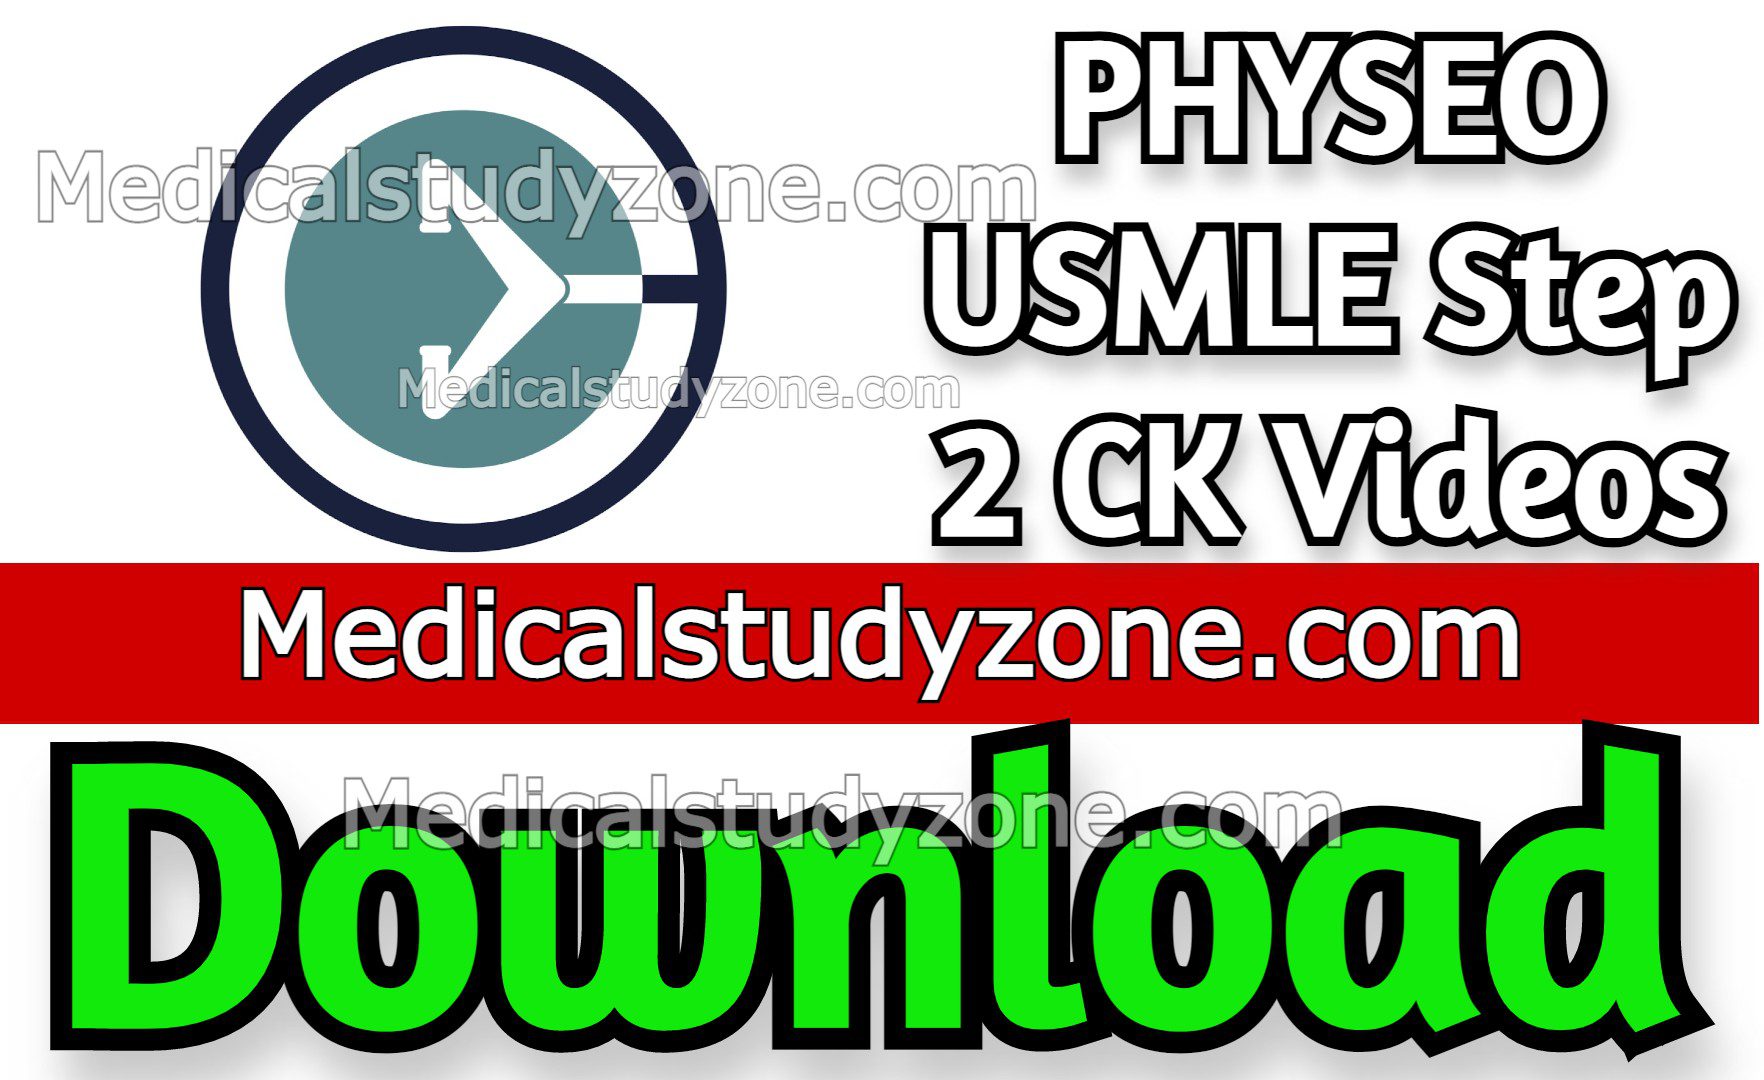 PHYSEO USMLE Step 2 CK 2023 Videos Free Download